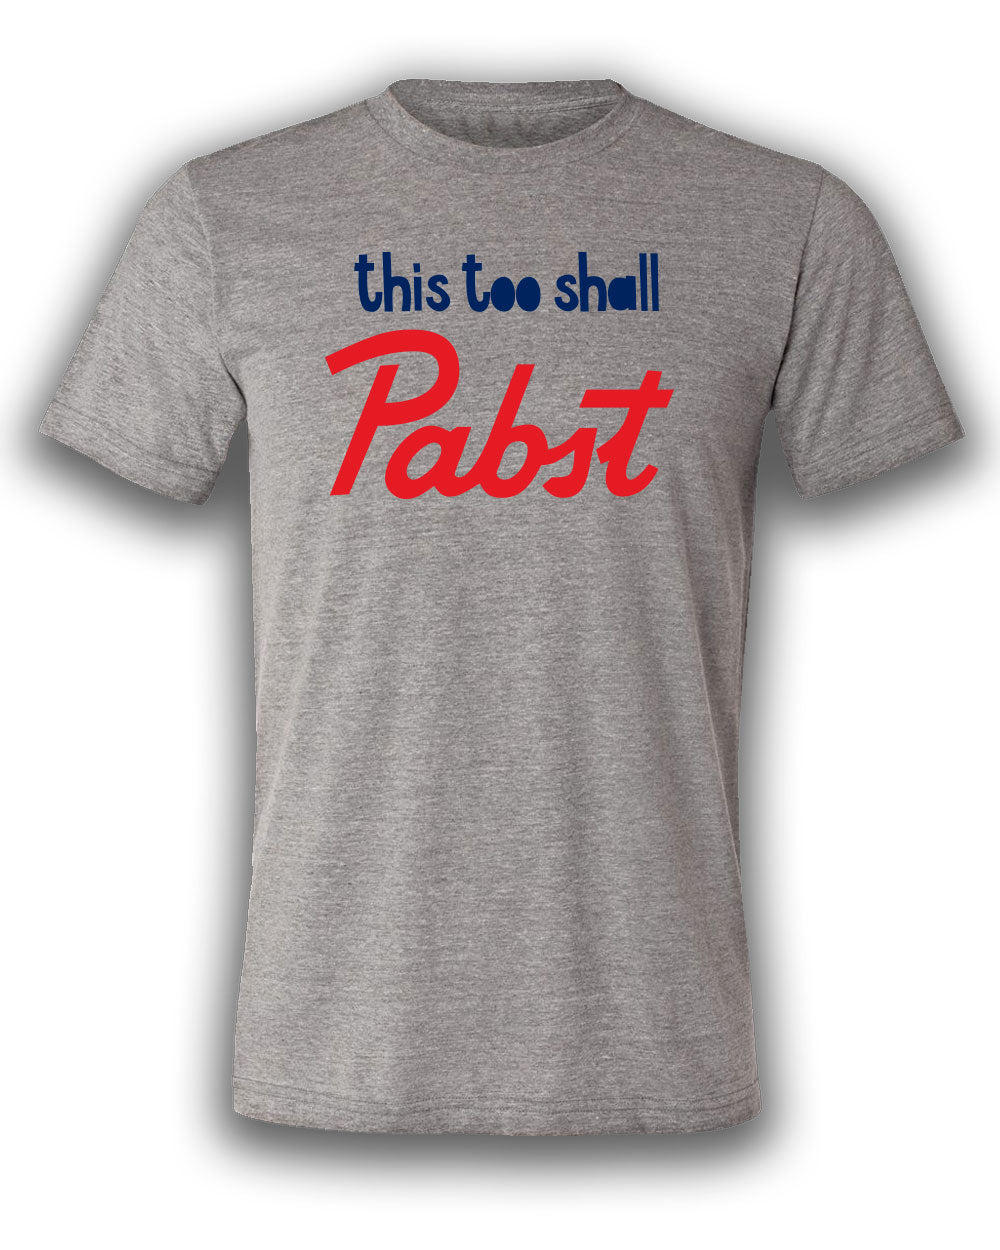 This Too Shall Pabst T-shirt